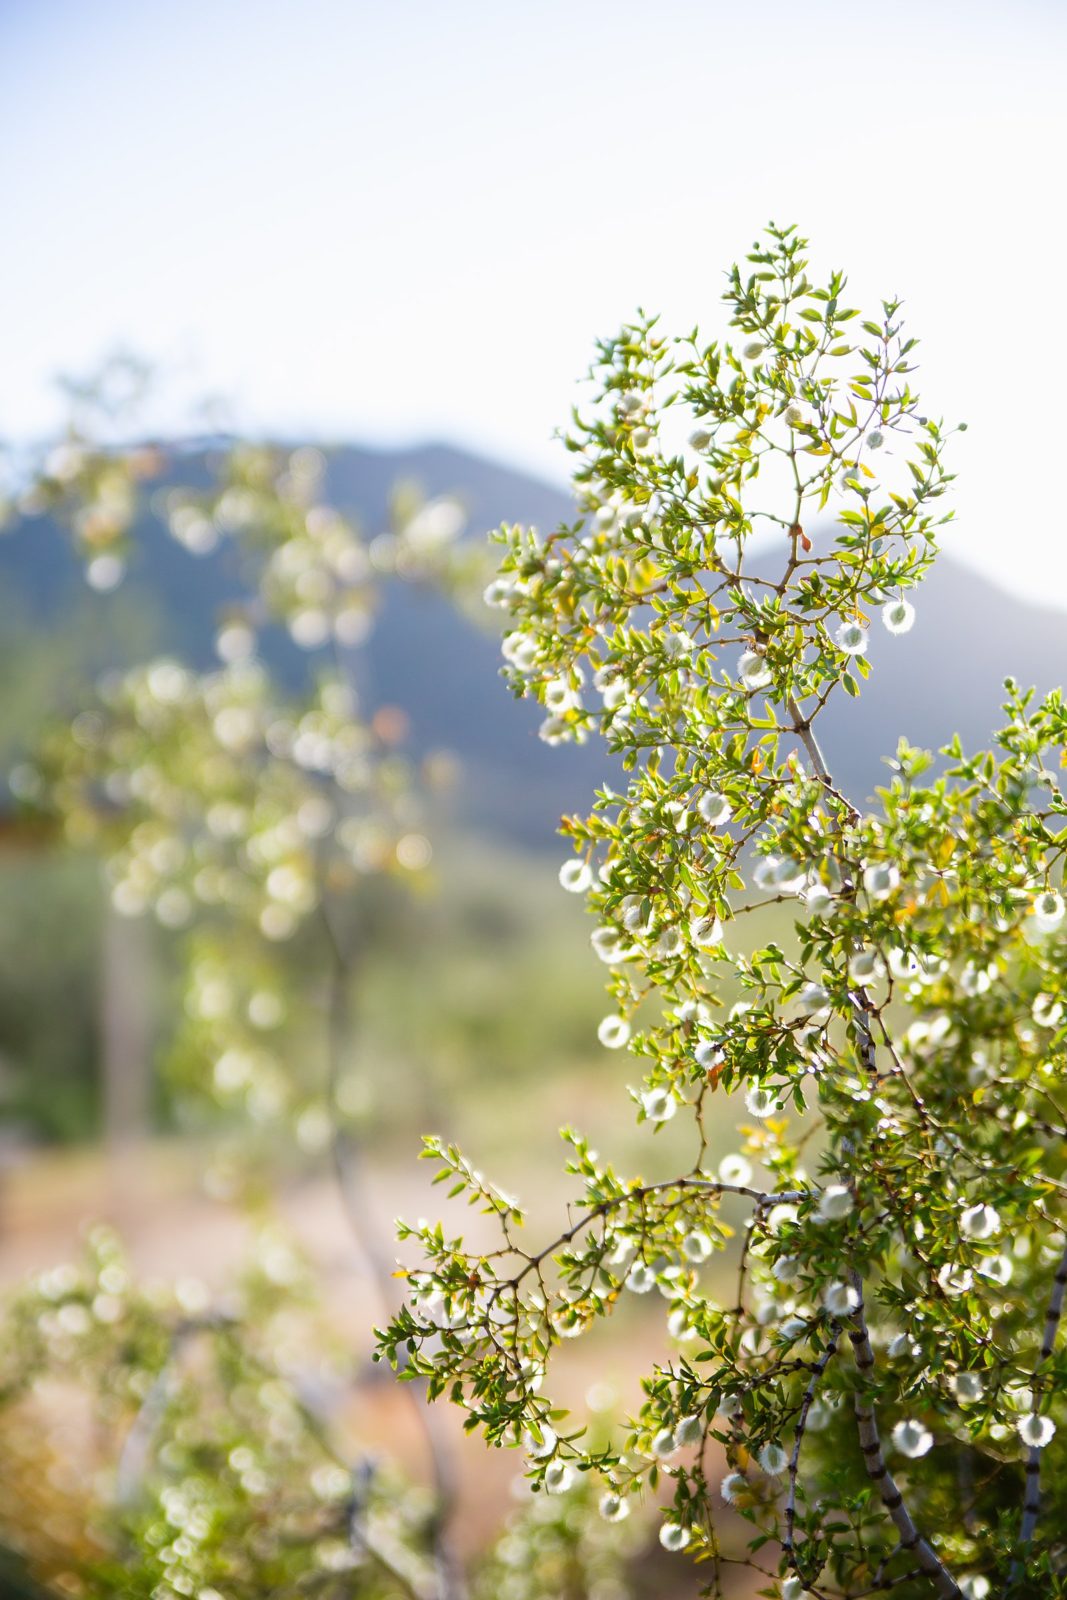 Detail image of the creosote bush in front of the White Tank mountains in the Arizona desert.